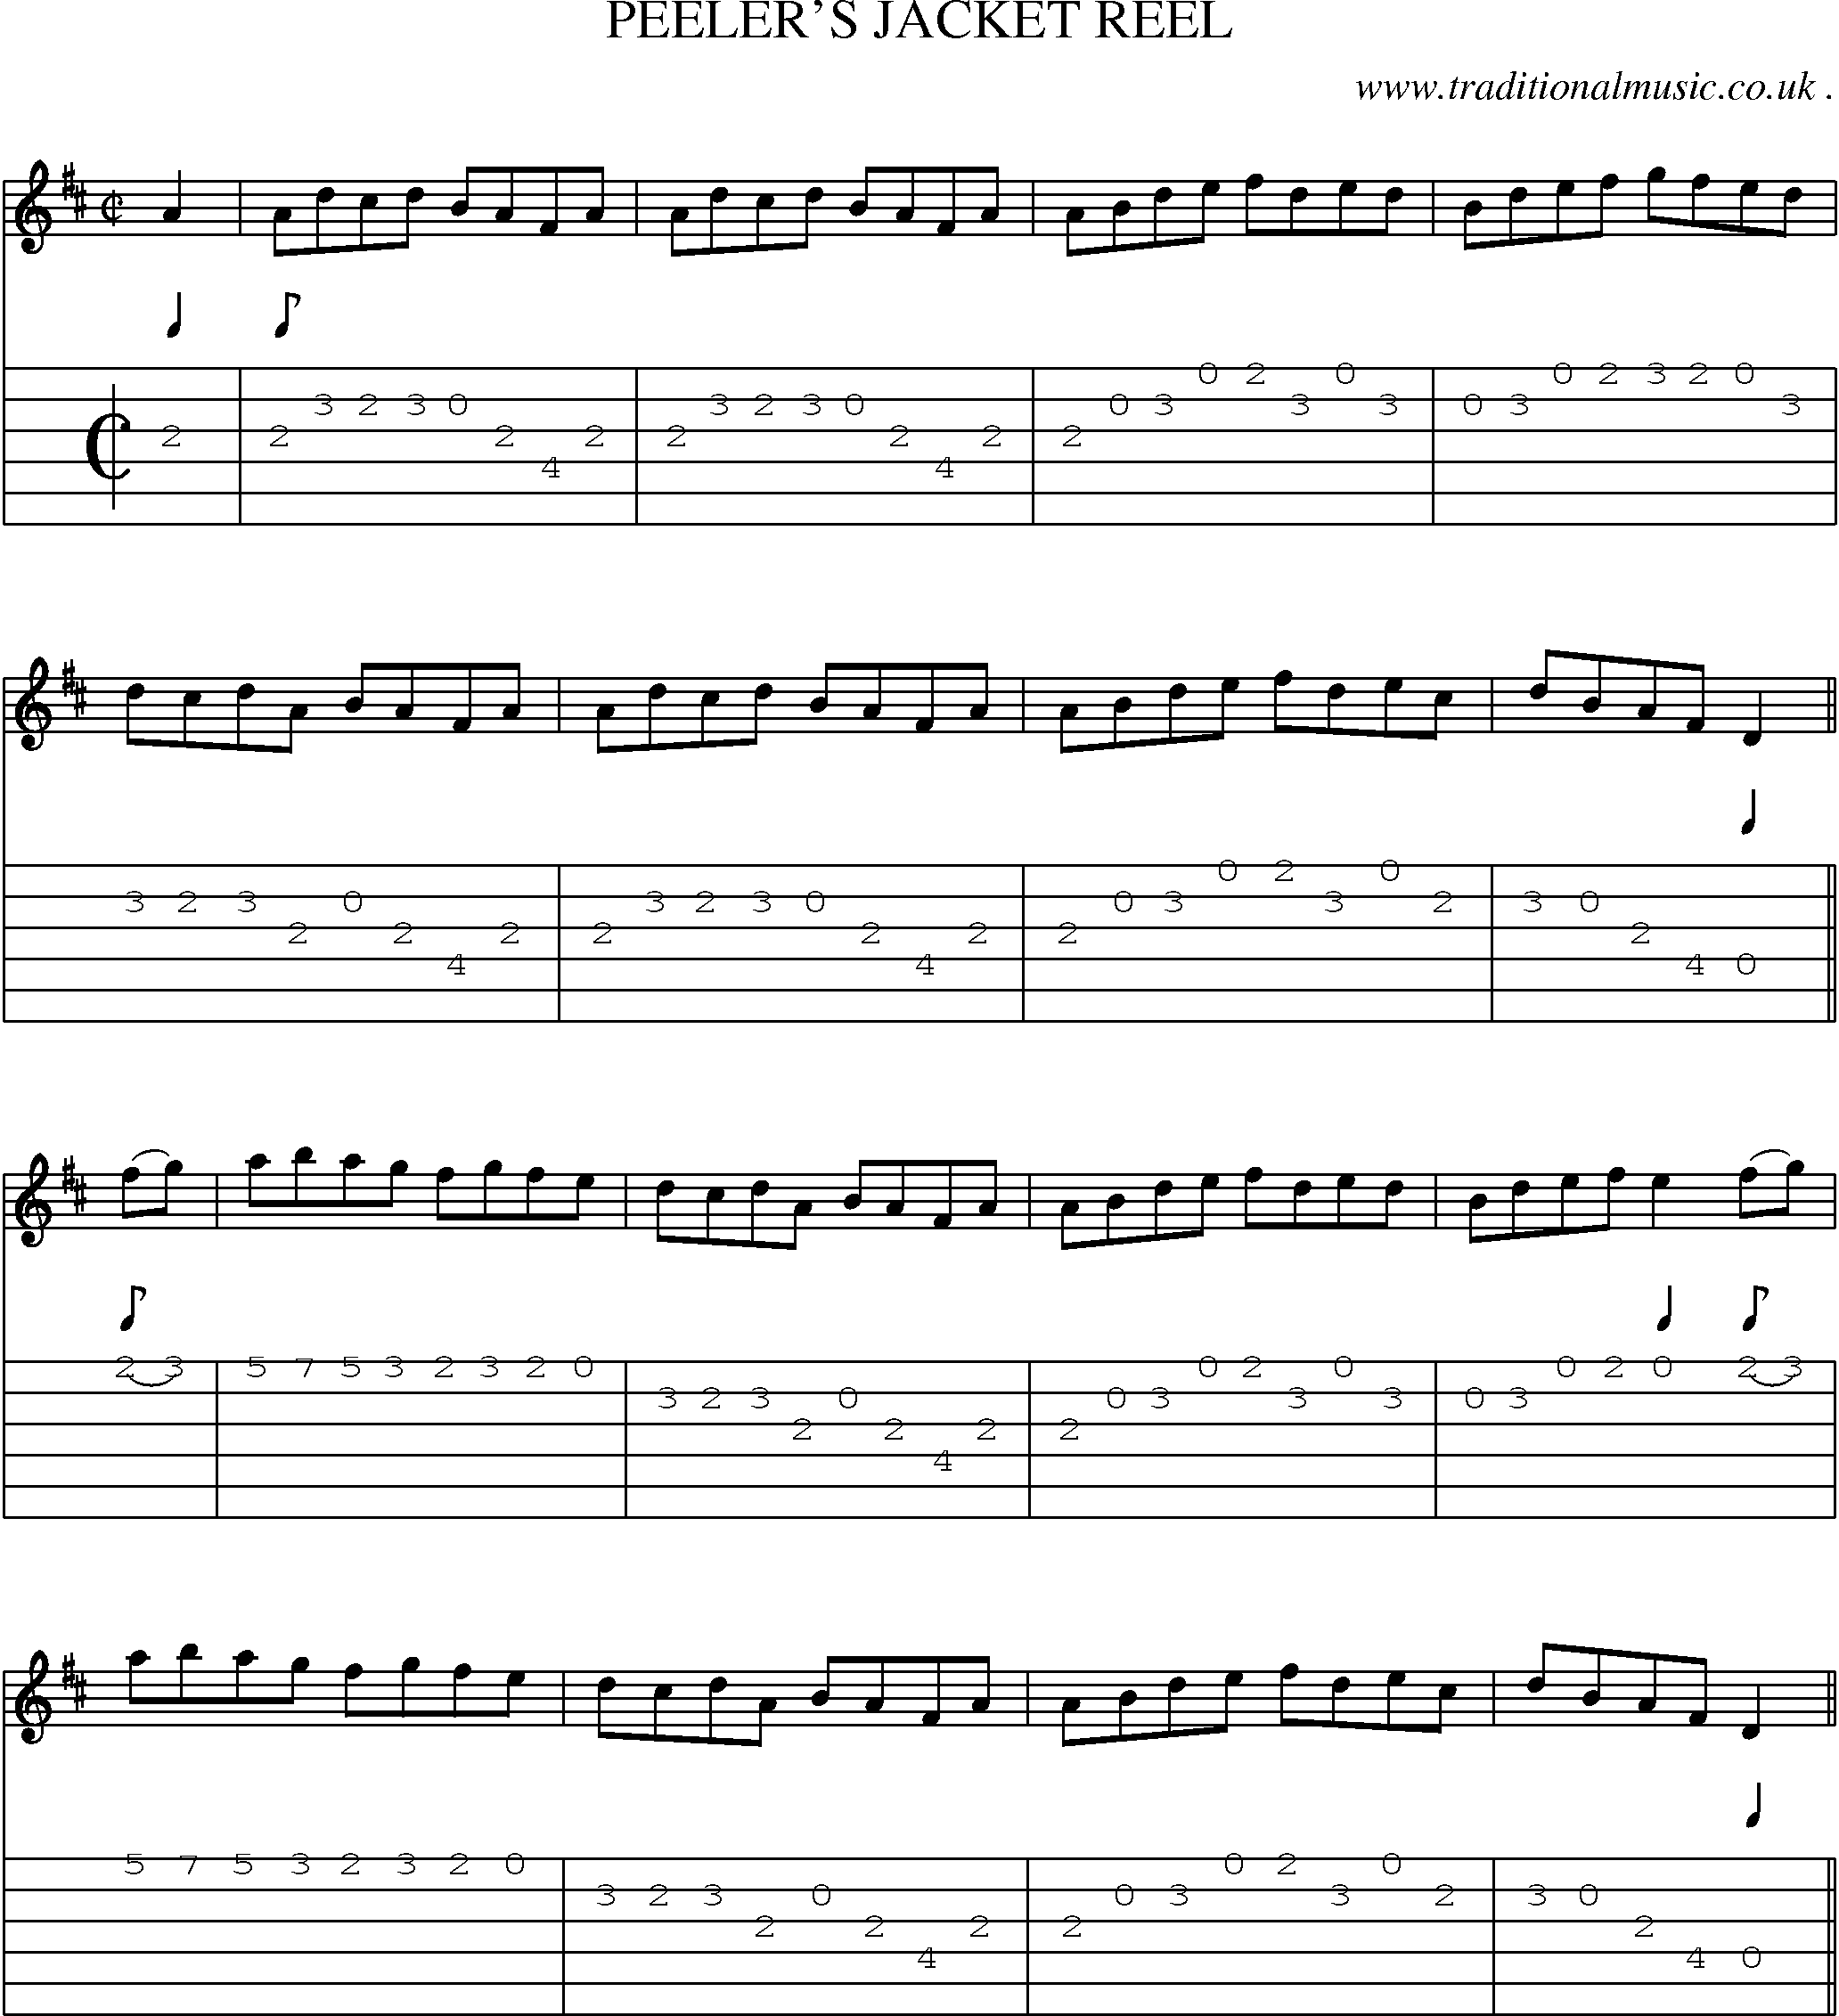 Sheet-Music and Guitar Tabs for Peelers Jacket Reel